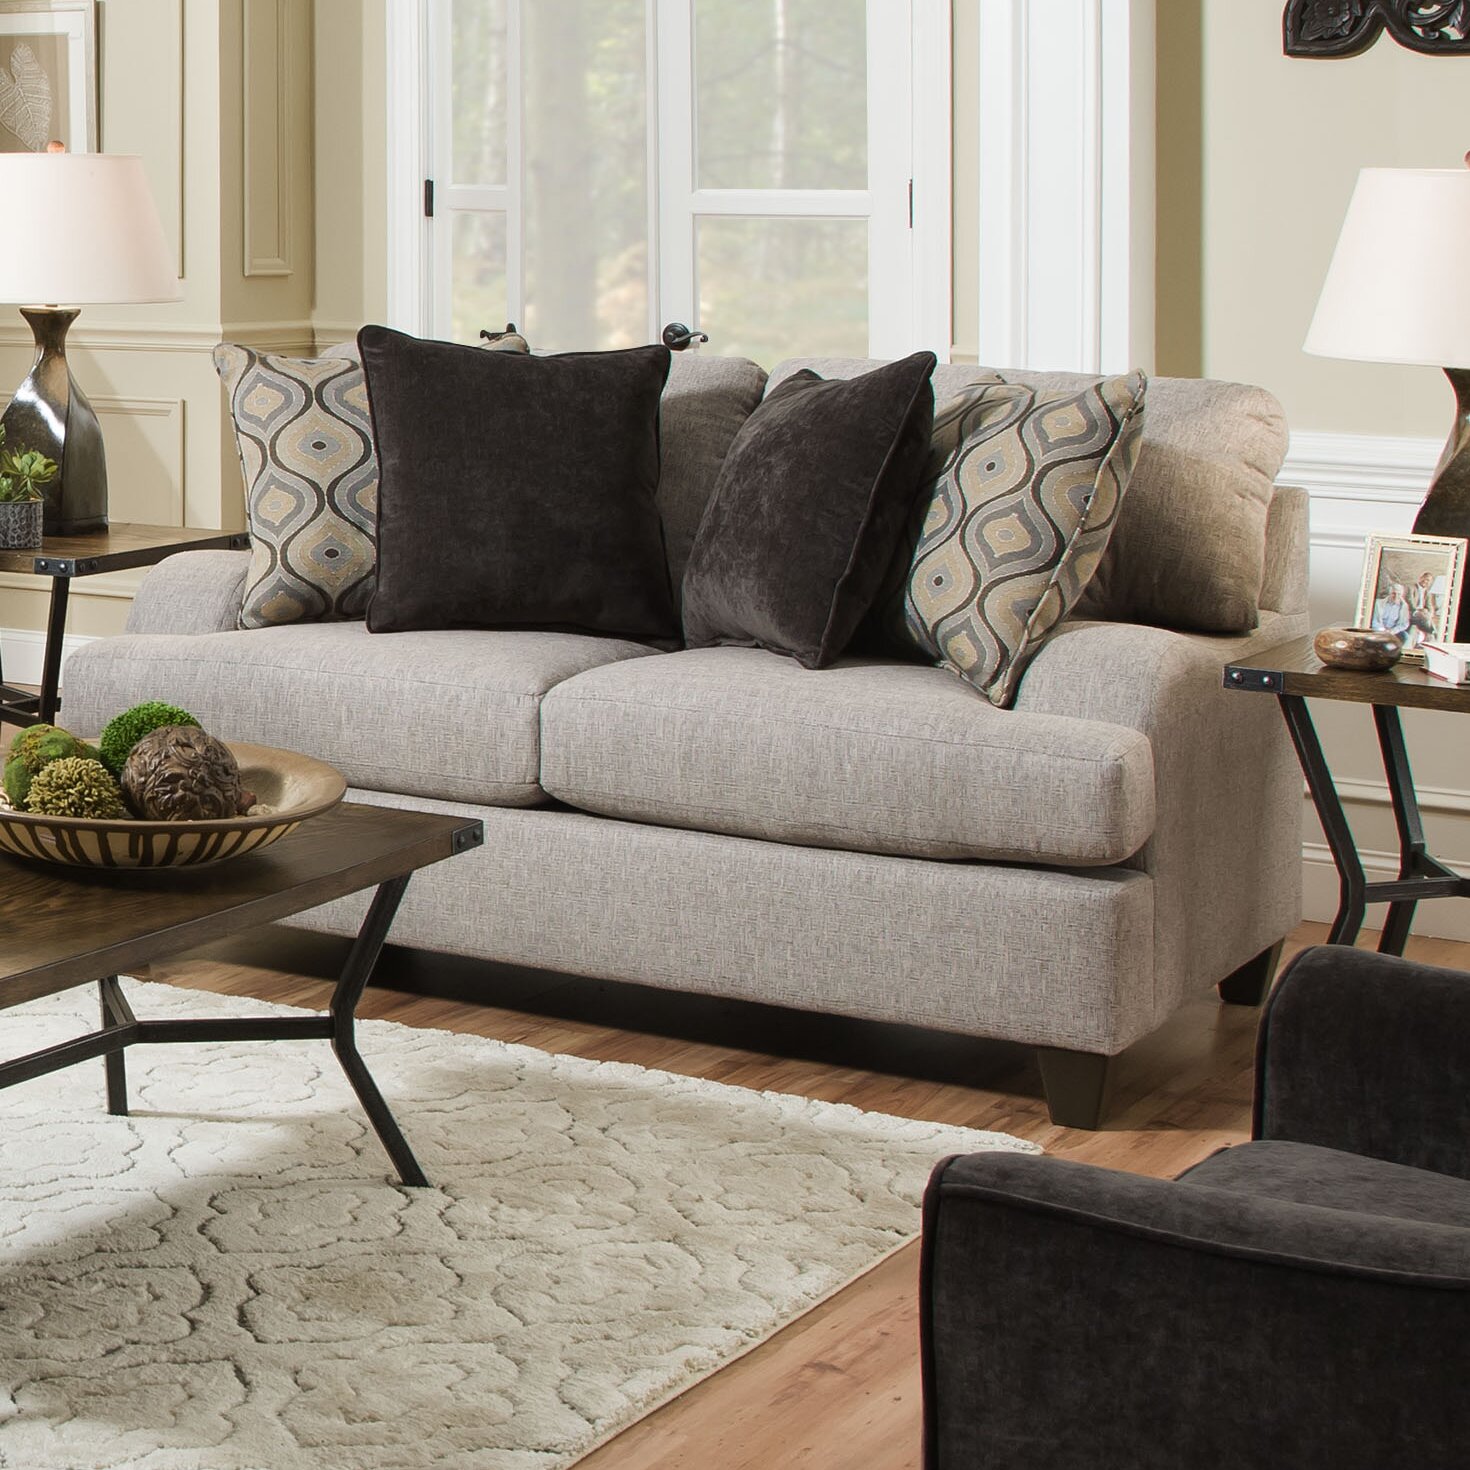 Alcott Hill Burrows Living Room Collection & Reviews | Wayfair